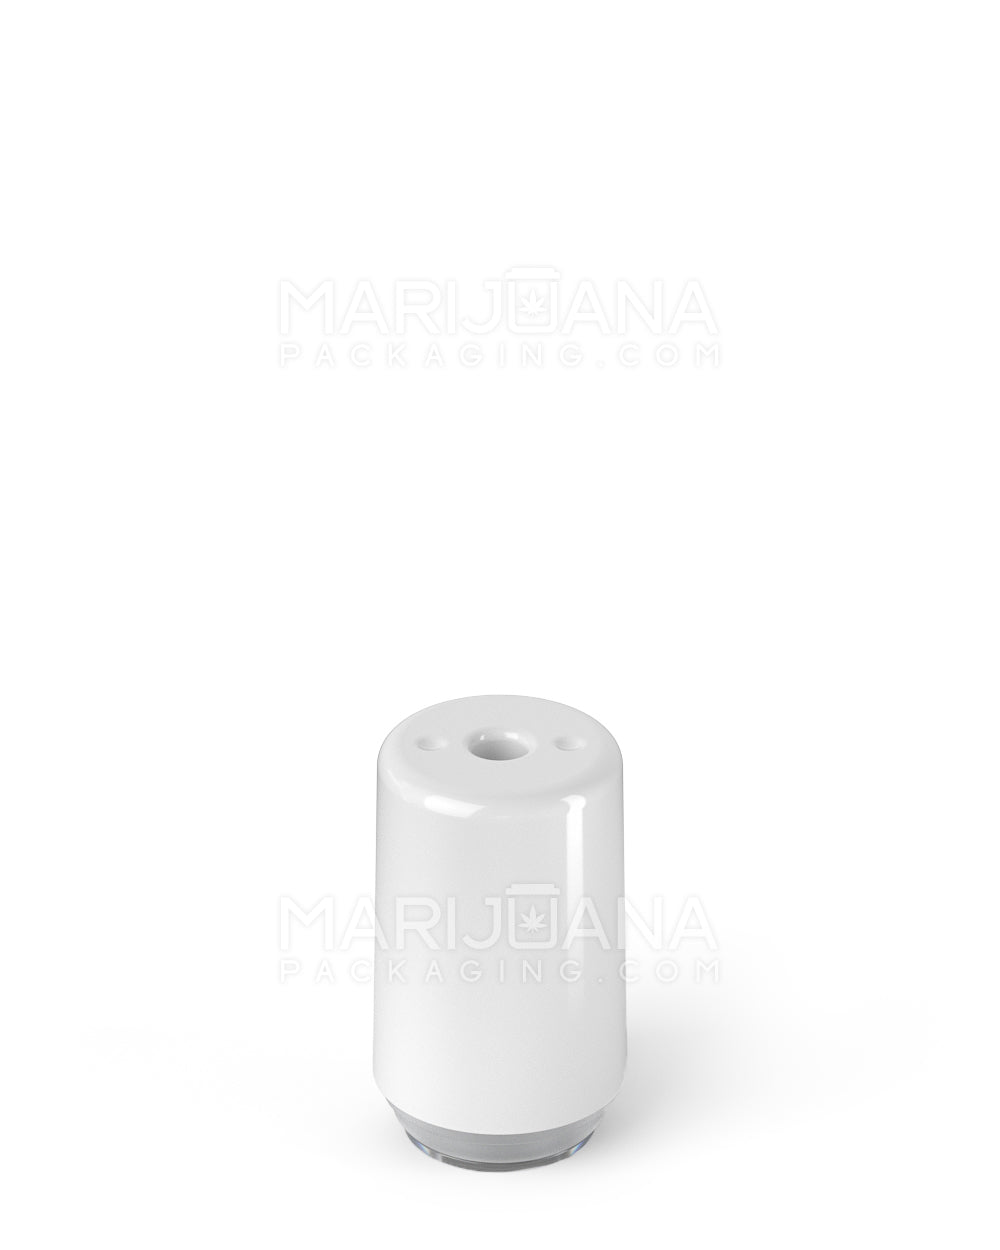 RAE | Round Vape Mouthpiece for Hand Press Plastic Cartridges | White Plastic - Hand Press - 400 Count - 3